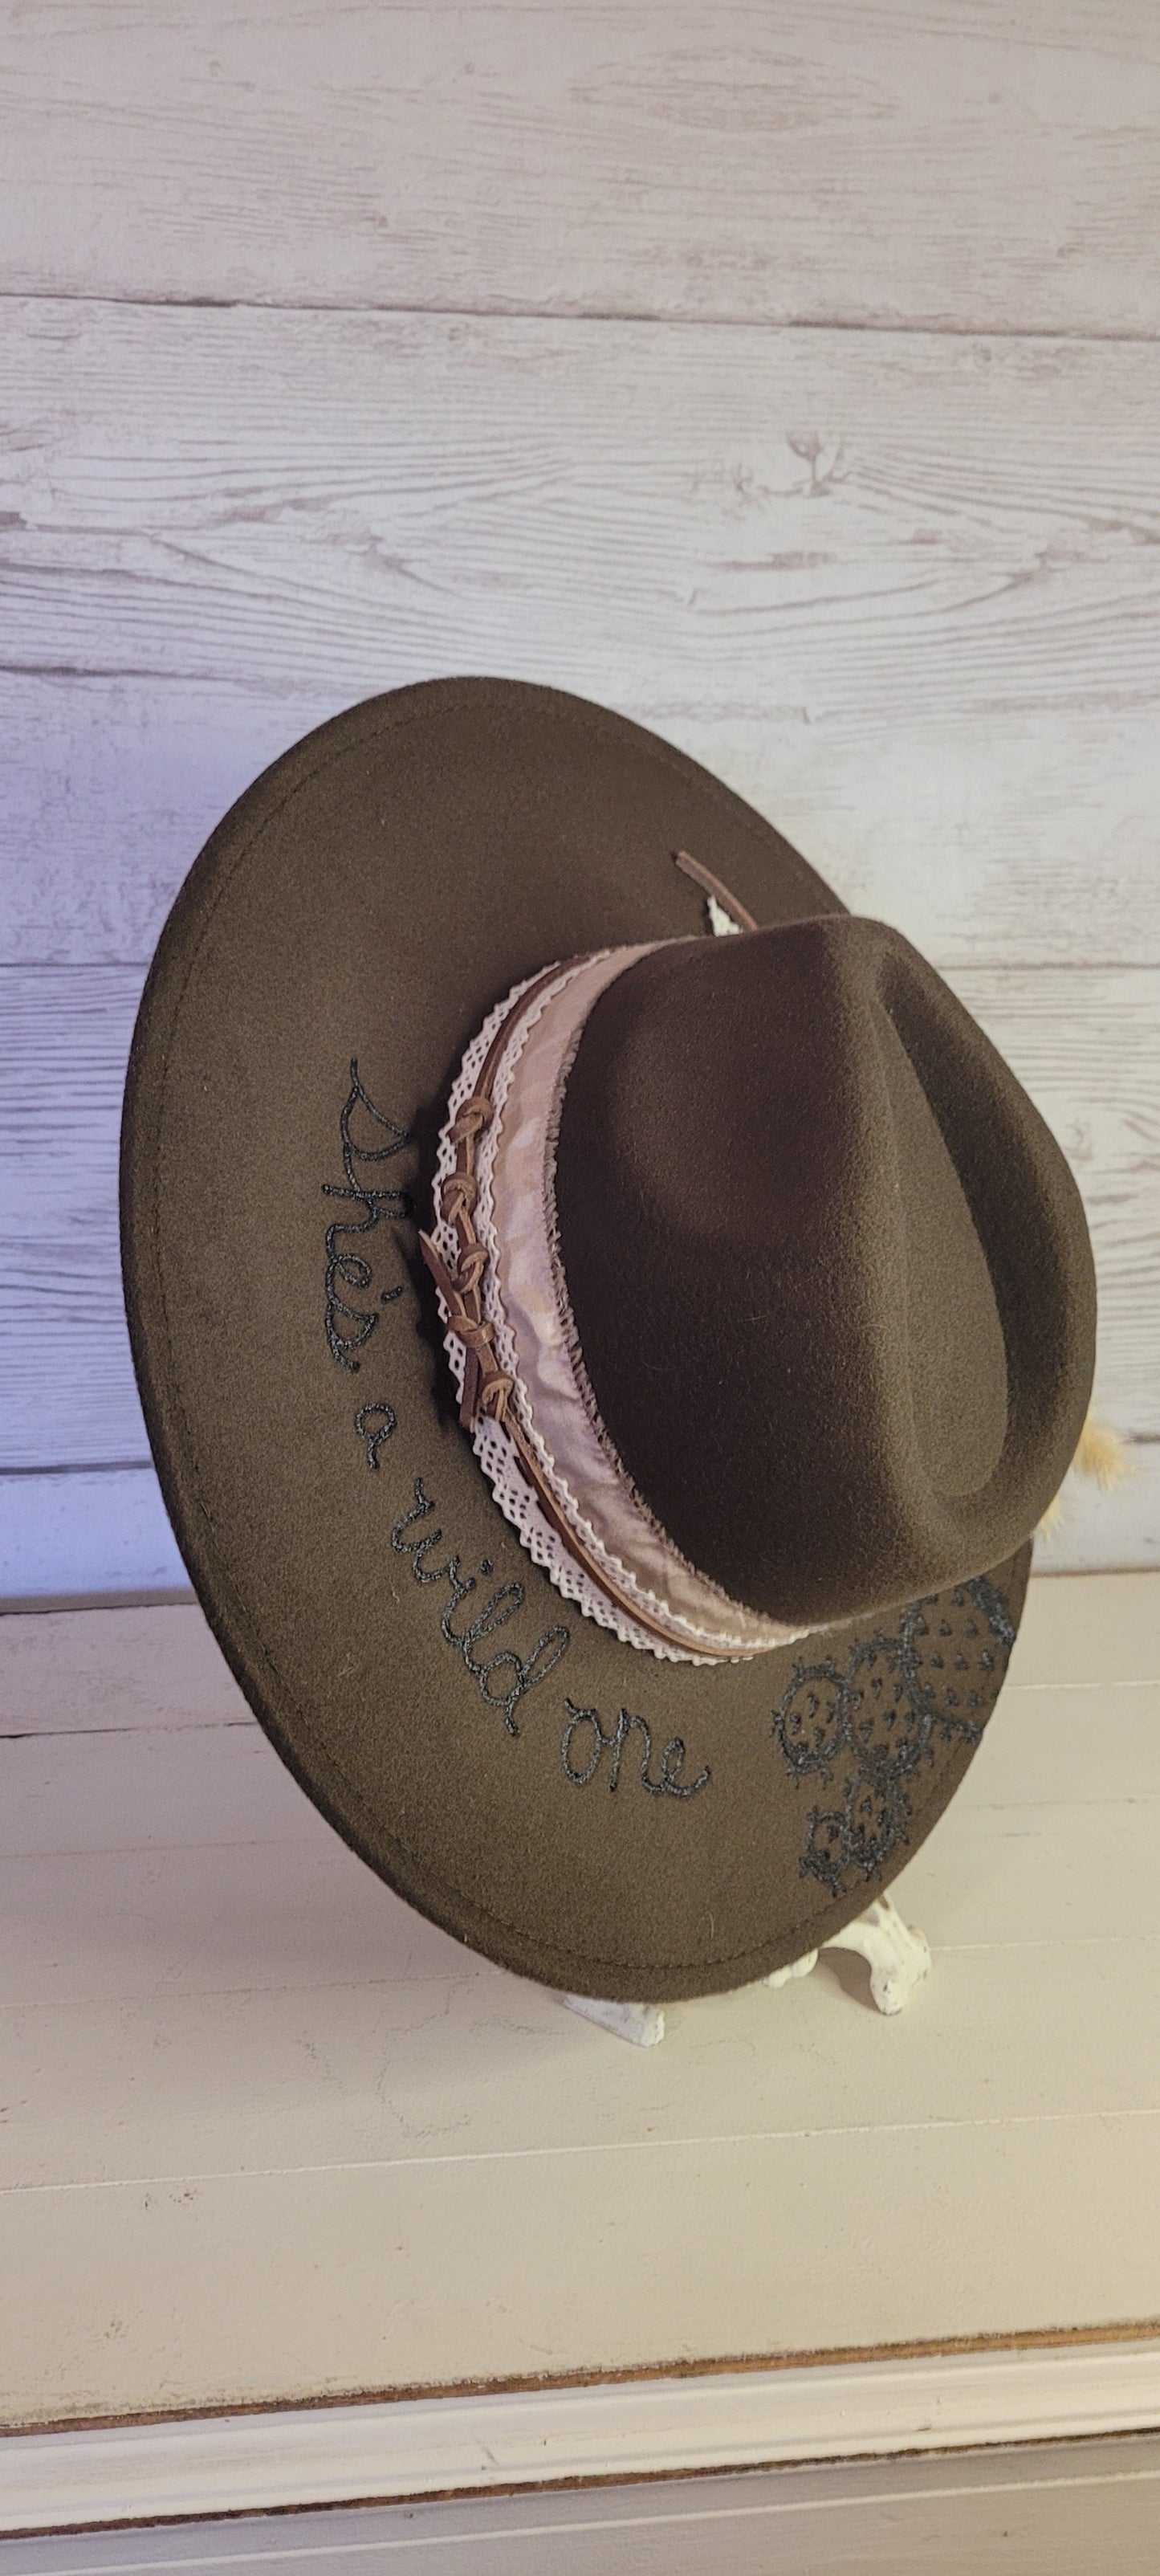 Features "She's a wild one" & cactus engraving Pampas, pine cones, light rose ribbon, natural lace ribbon, leather band Felt hat Flat brim 65% polyester and 35% cotton Ribbon drawstring for hat size adjustment Head Circumference: 24" Crown Height: 5" Brim Length: 15.75" Brim Width: 14.5" Branded & numbered inside crown Custom designed by Kayla